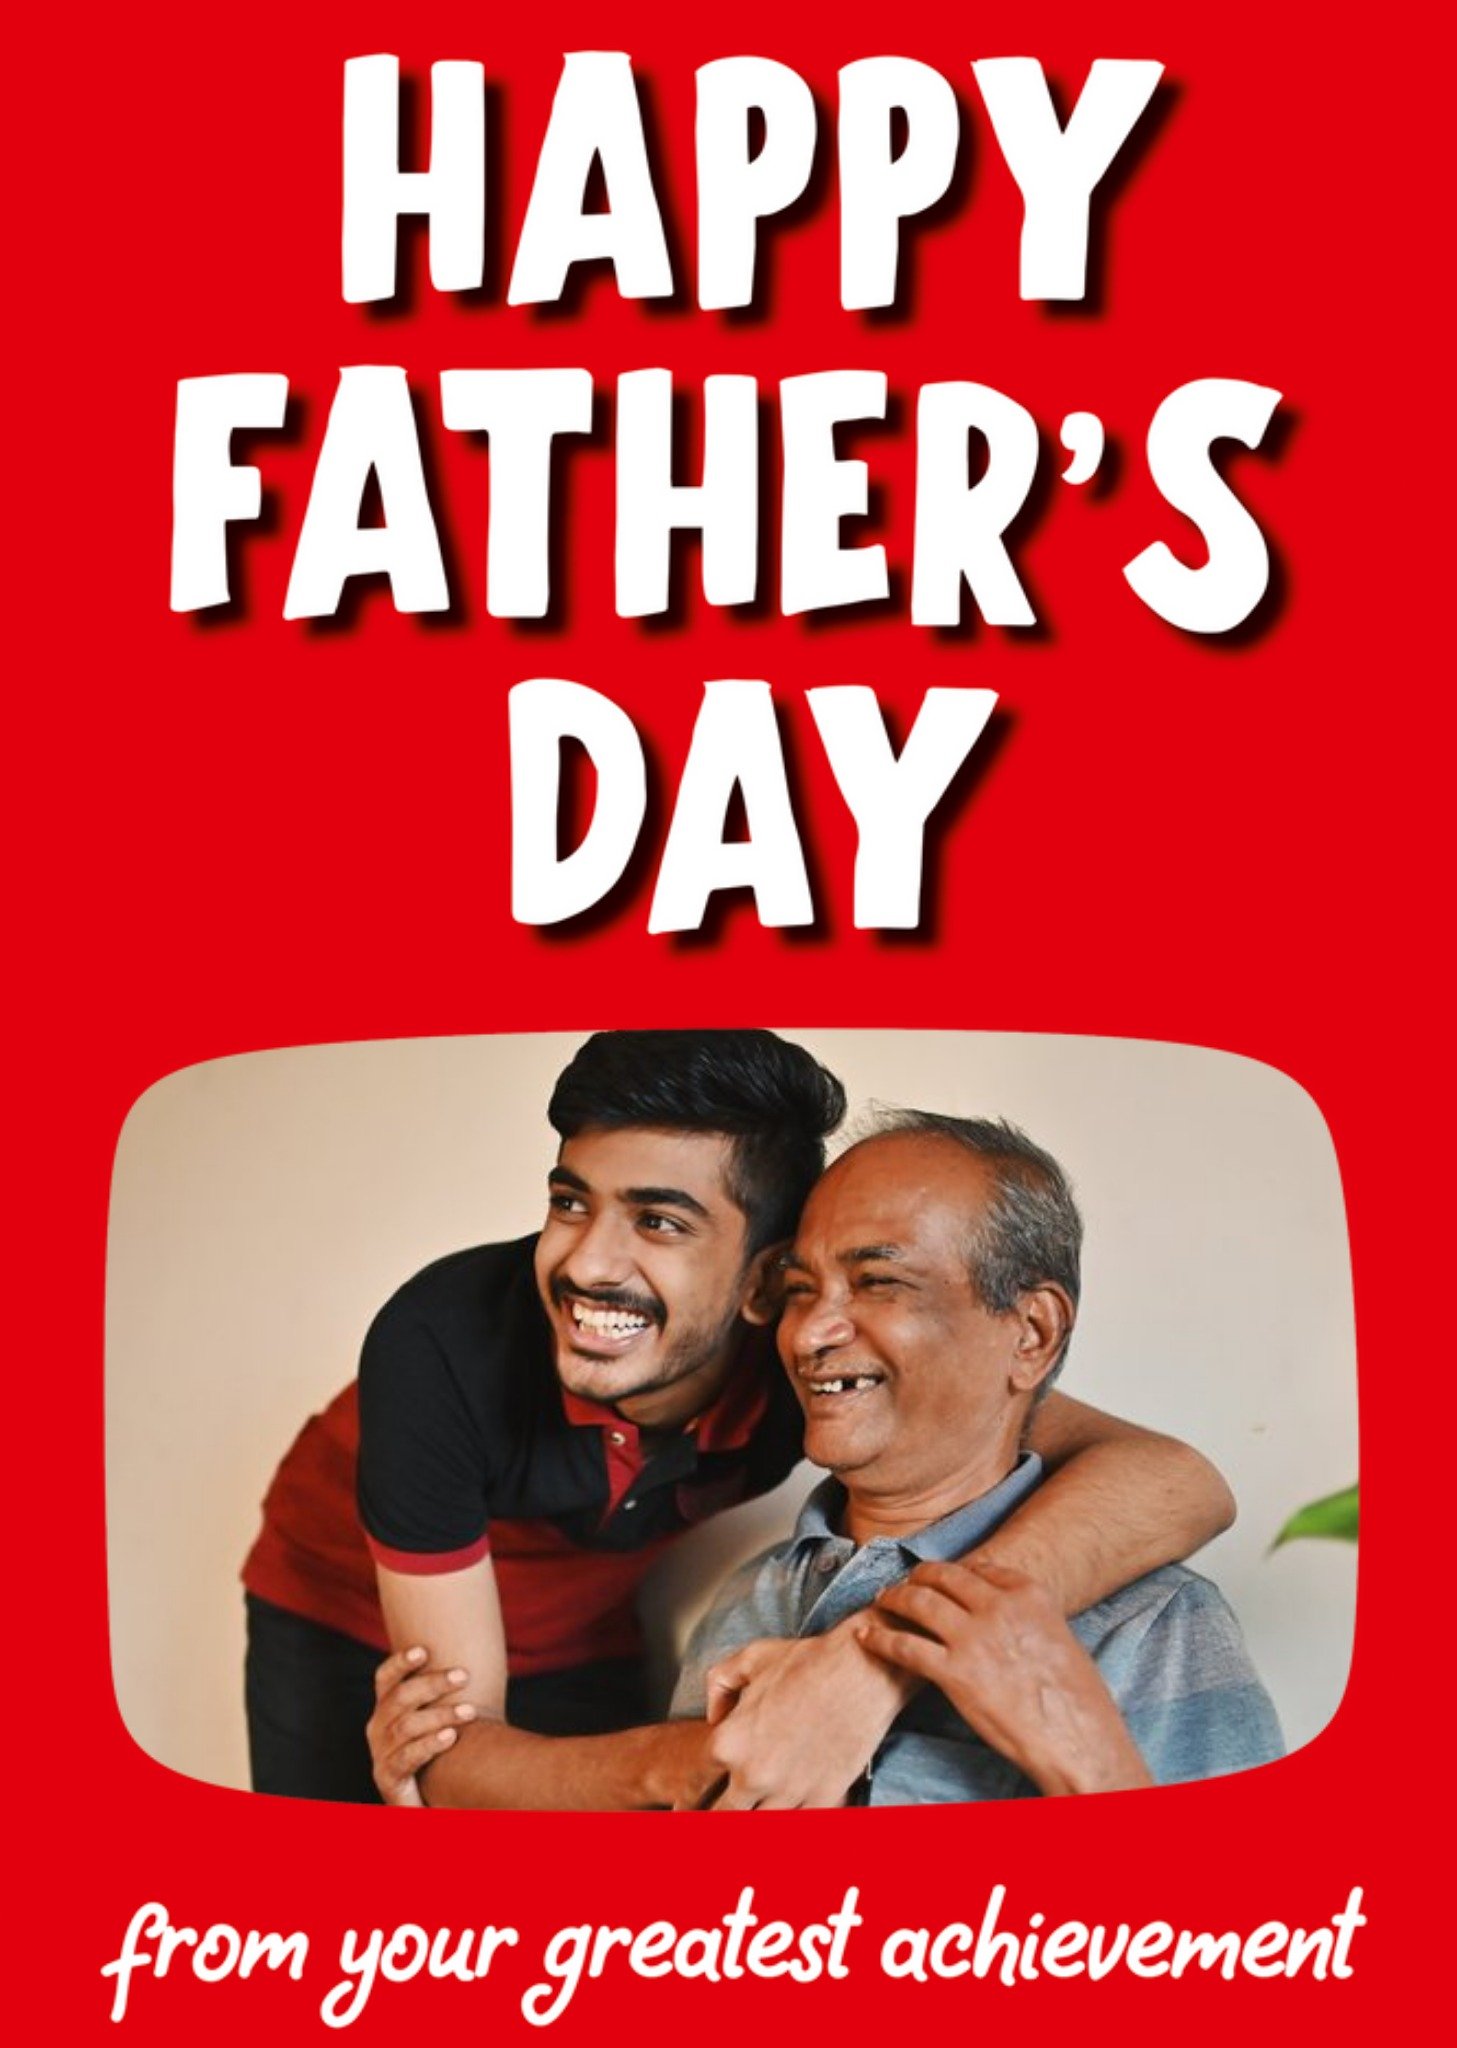 Banter King Funny Red Typographic Photo Upload Father's Day Card Ecard